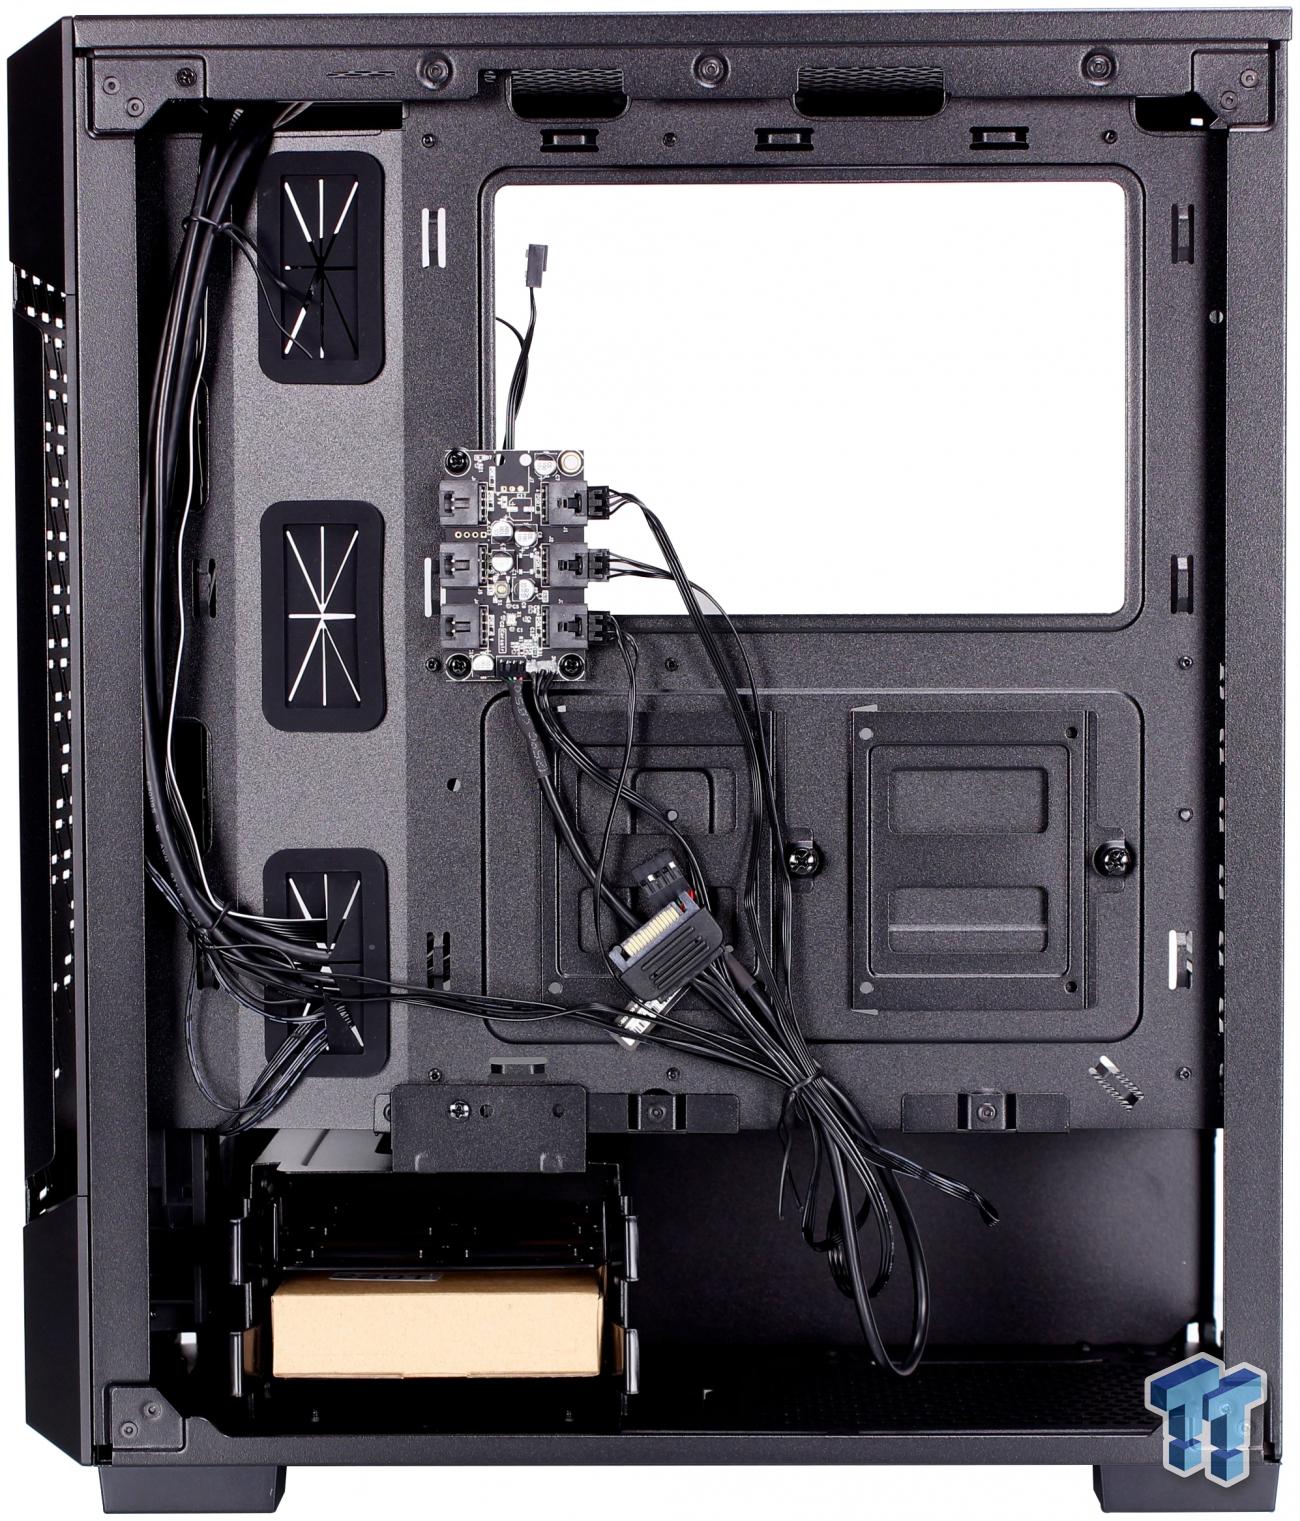 9087_21_corsair-icue-220t-rgb-mid-tower-chassis-review_full.jpg